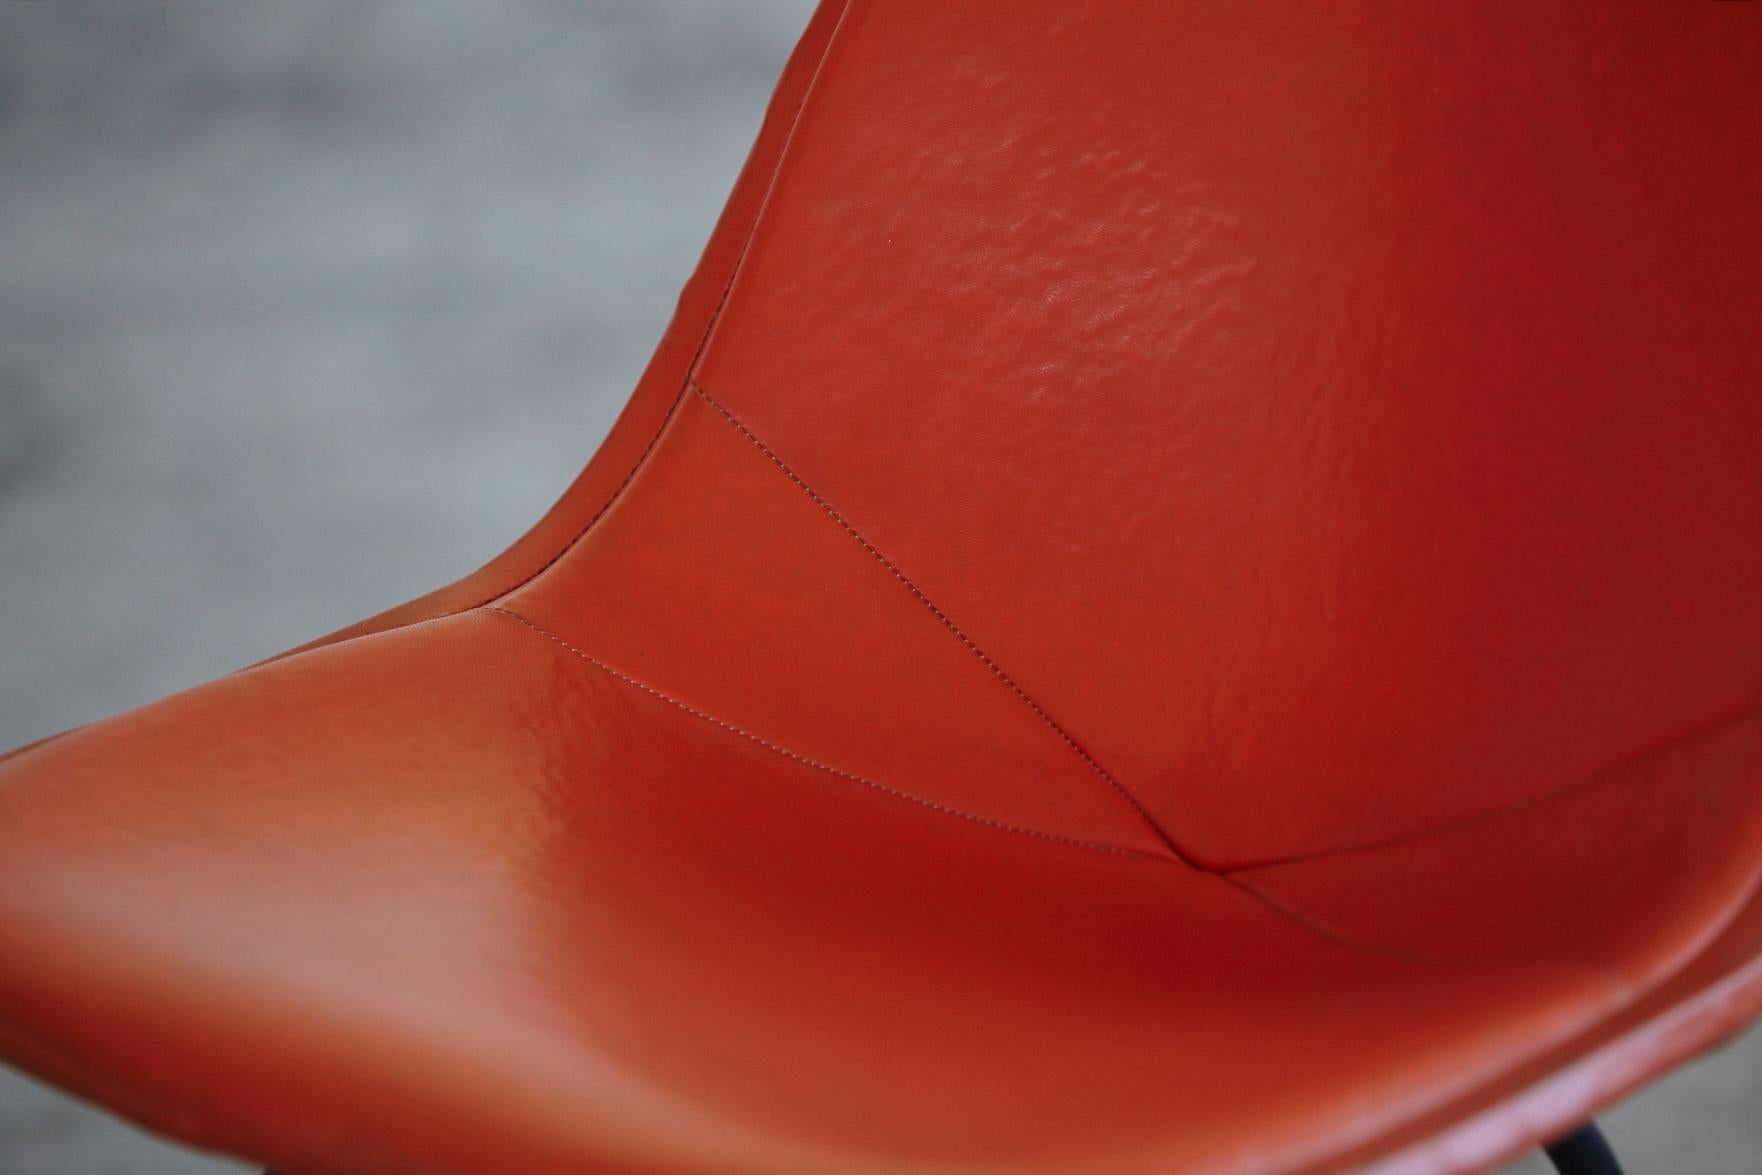 Mid-20th Century Original Eames DKX-1 Side Chair in Orange Leather for Herman Miller, 1960s For Sale